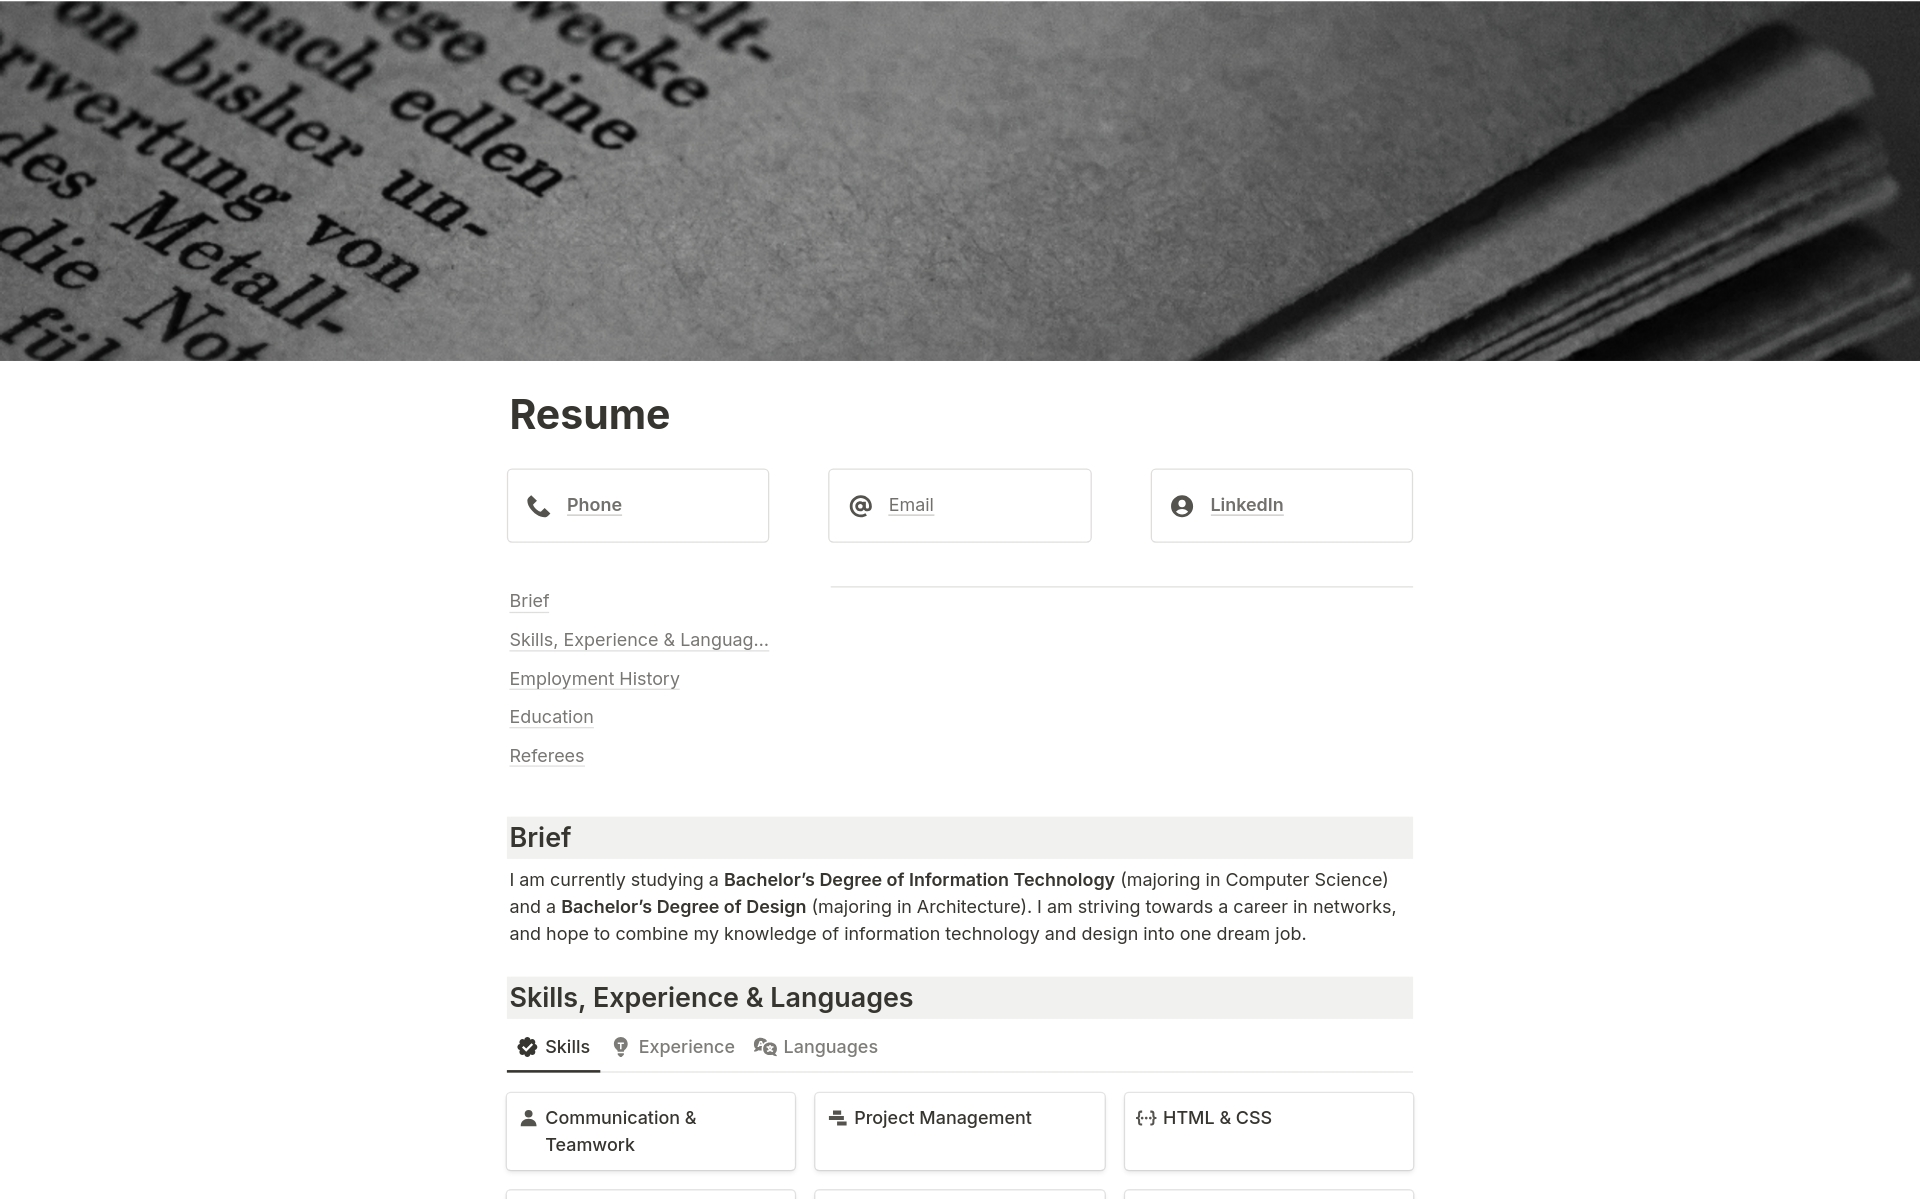 A stylish, black and white resume intended for subtlety and professionalism.